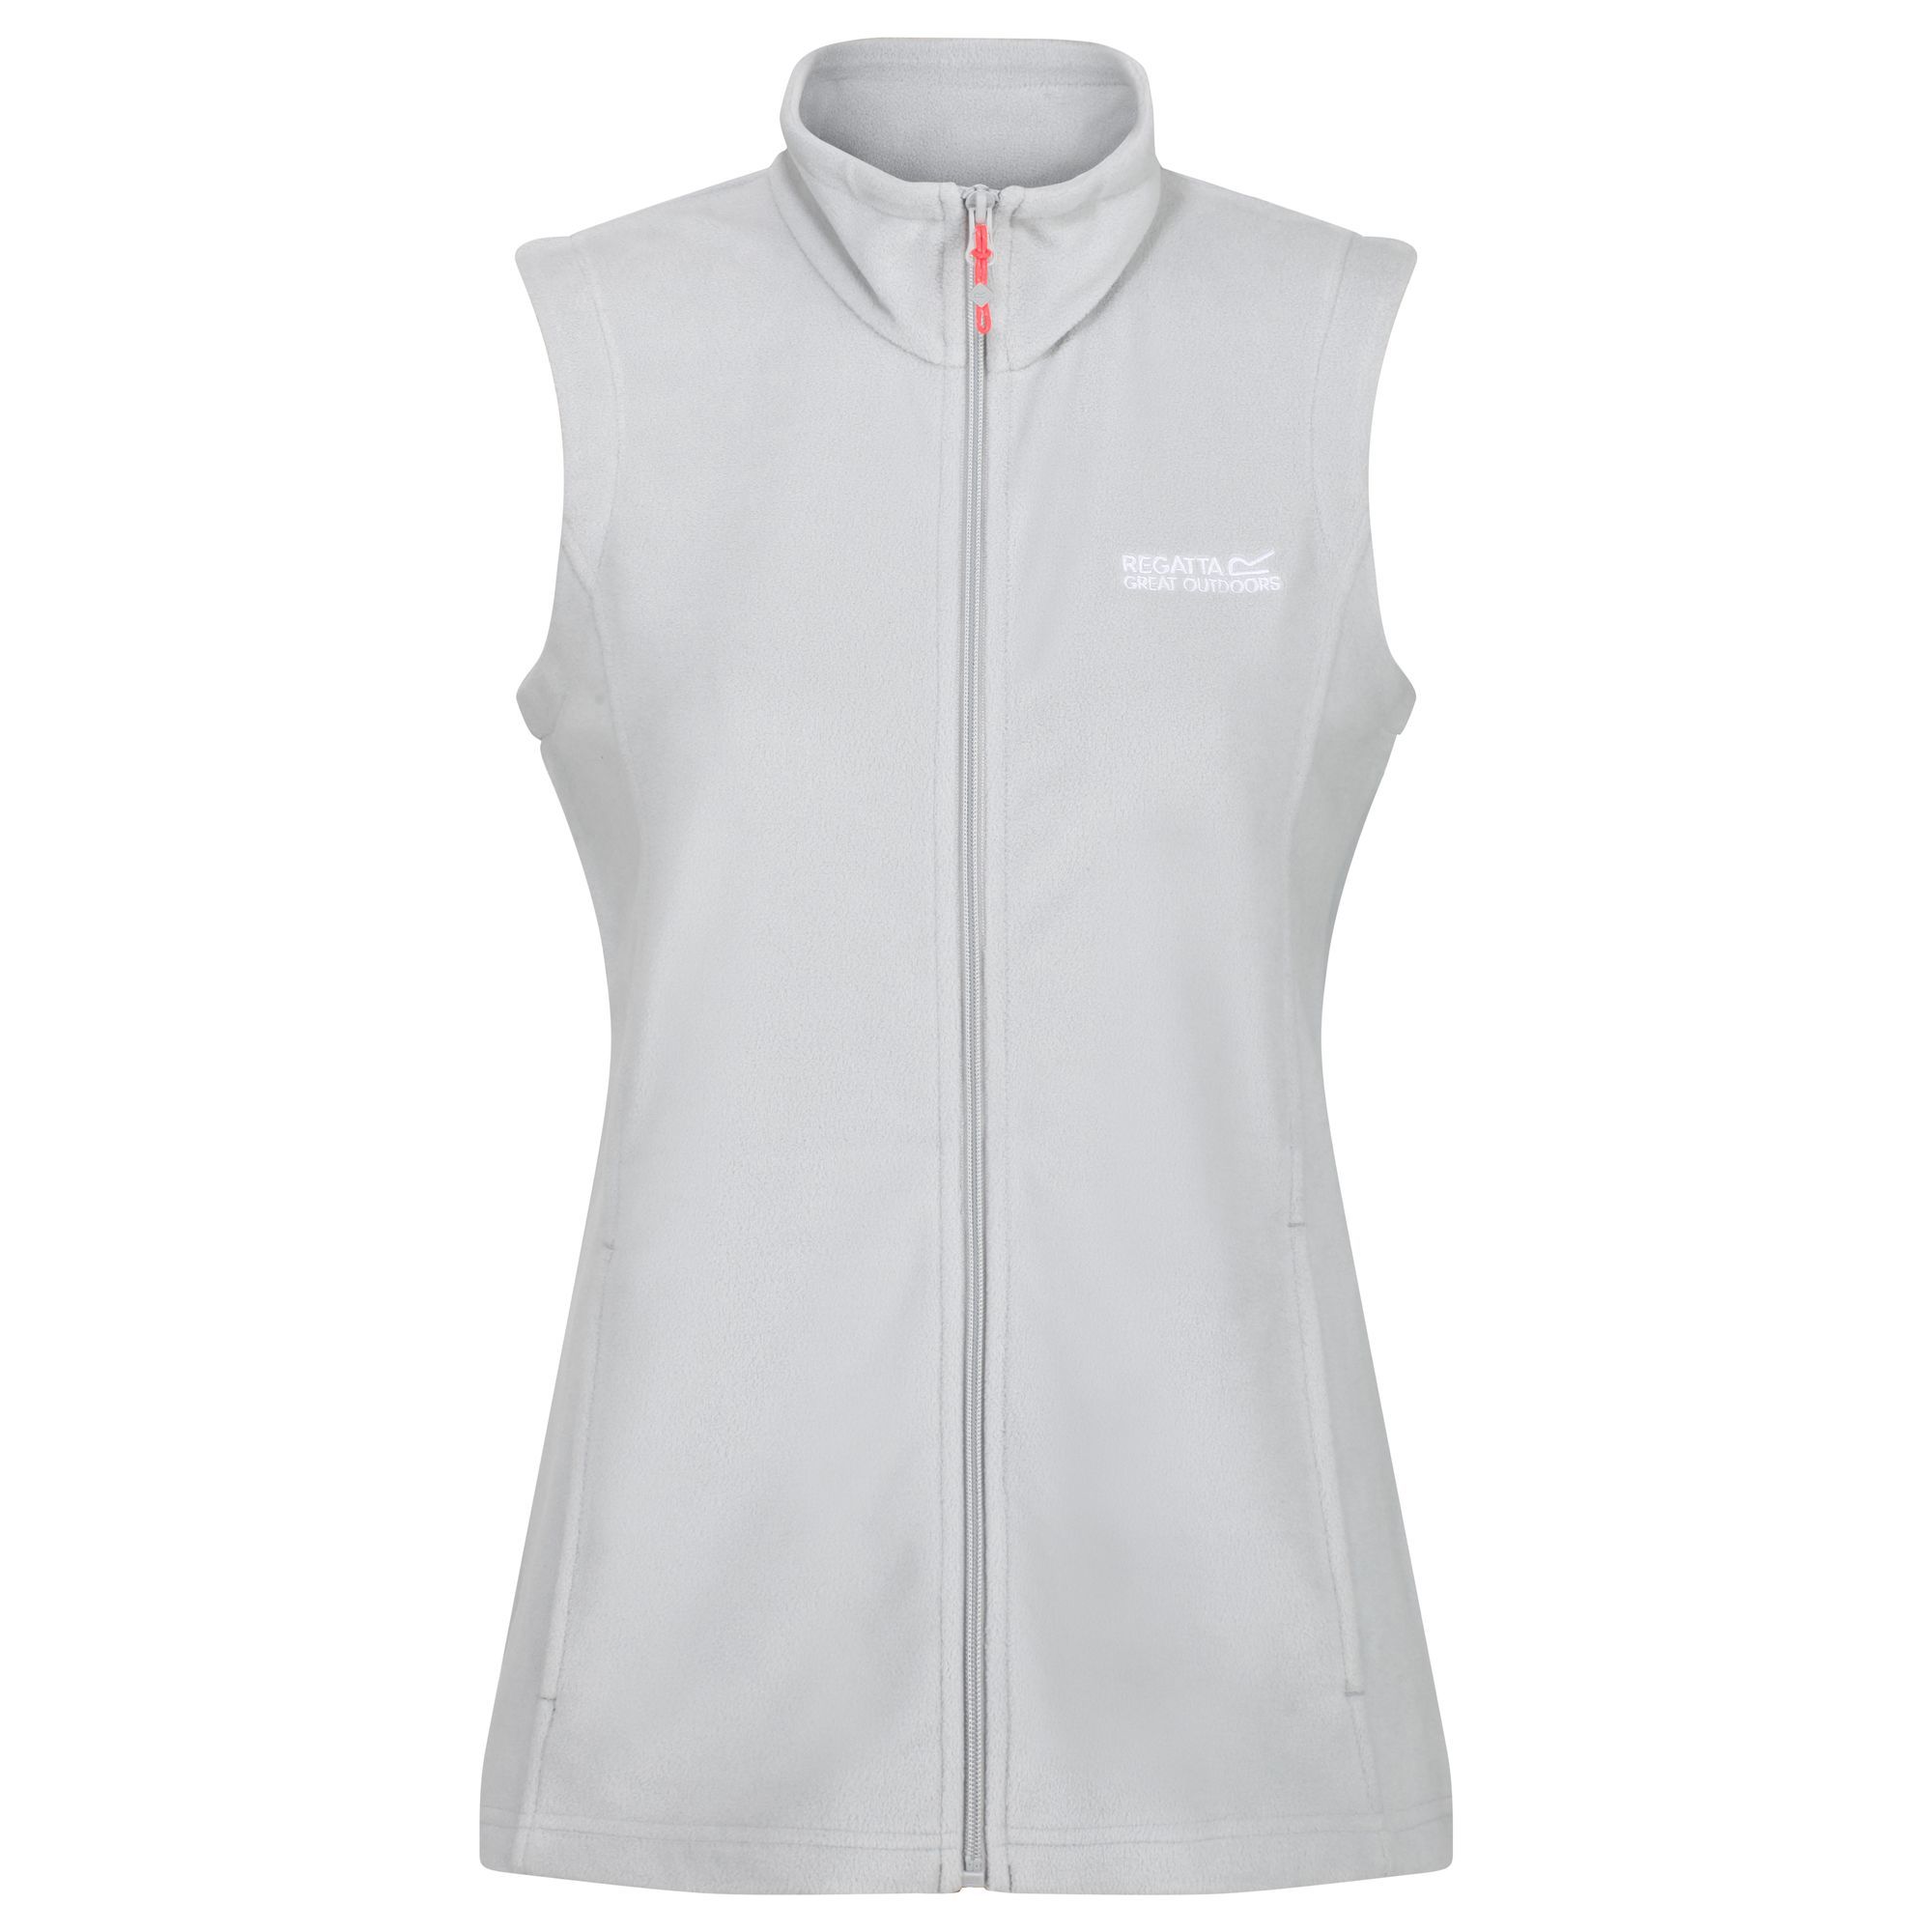 The womens Sweetness is a popular four-season fleece bodywarmer, loved for both its great value and quality. Its cut with a relaxed, everyday fit from lightweight Symmetry fleece with a full zip fastening. Pop it on over tops or blouses when theres a nip in the air or layer it under jackets for extra warmth during winter months. 100% Polyester. Regatta Womens sizing (bust approx): 6 (30in/76cm), 8 (32in/81cm), 10 (34in/86cm), 12 (36in/92cm), 14 (38in/97cm), 16 (40in/102cm), 18 (43in/109cm), 20 (45in/114cm), 22 (48in/122cm), 24 (50in/127cm), 26 (52in/132cm), 28 (54in/137cm), 30 (56in/142cm), 32 (58in/147cm), 34 (60in/152cm), 36 (62in/158cm).